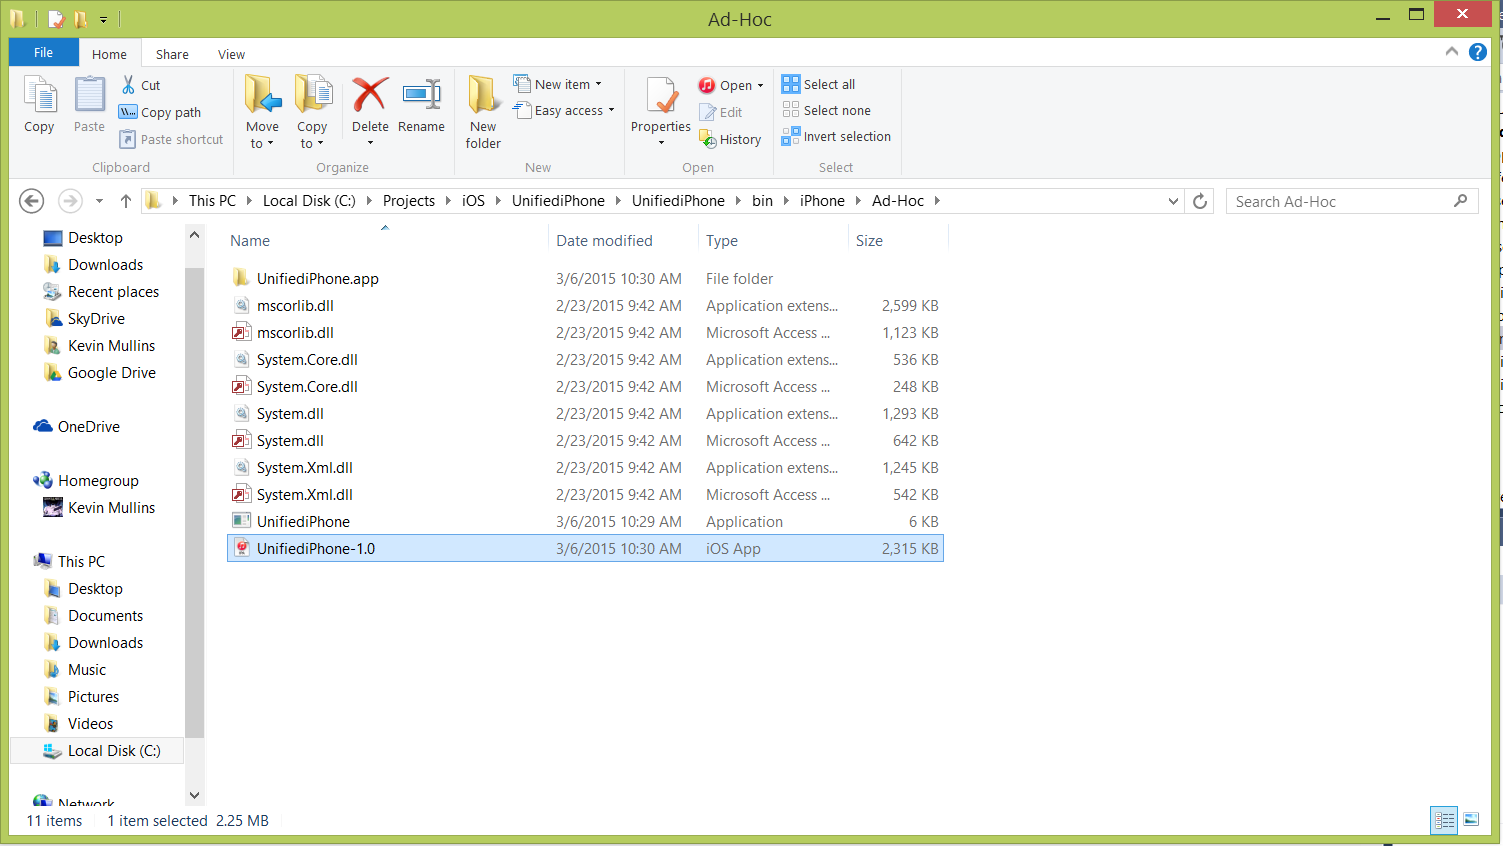 The IPA in the file explorer